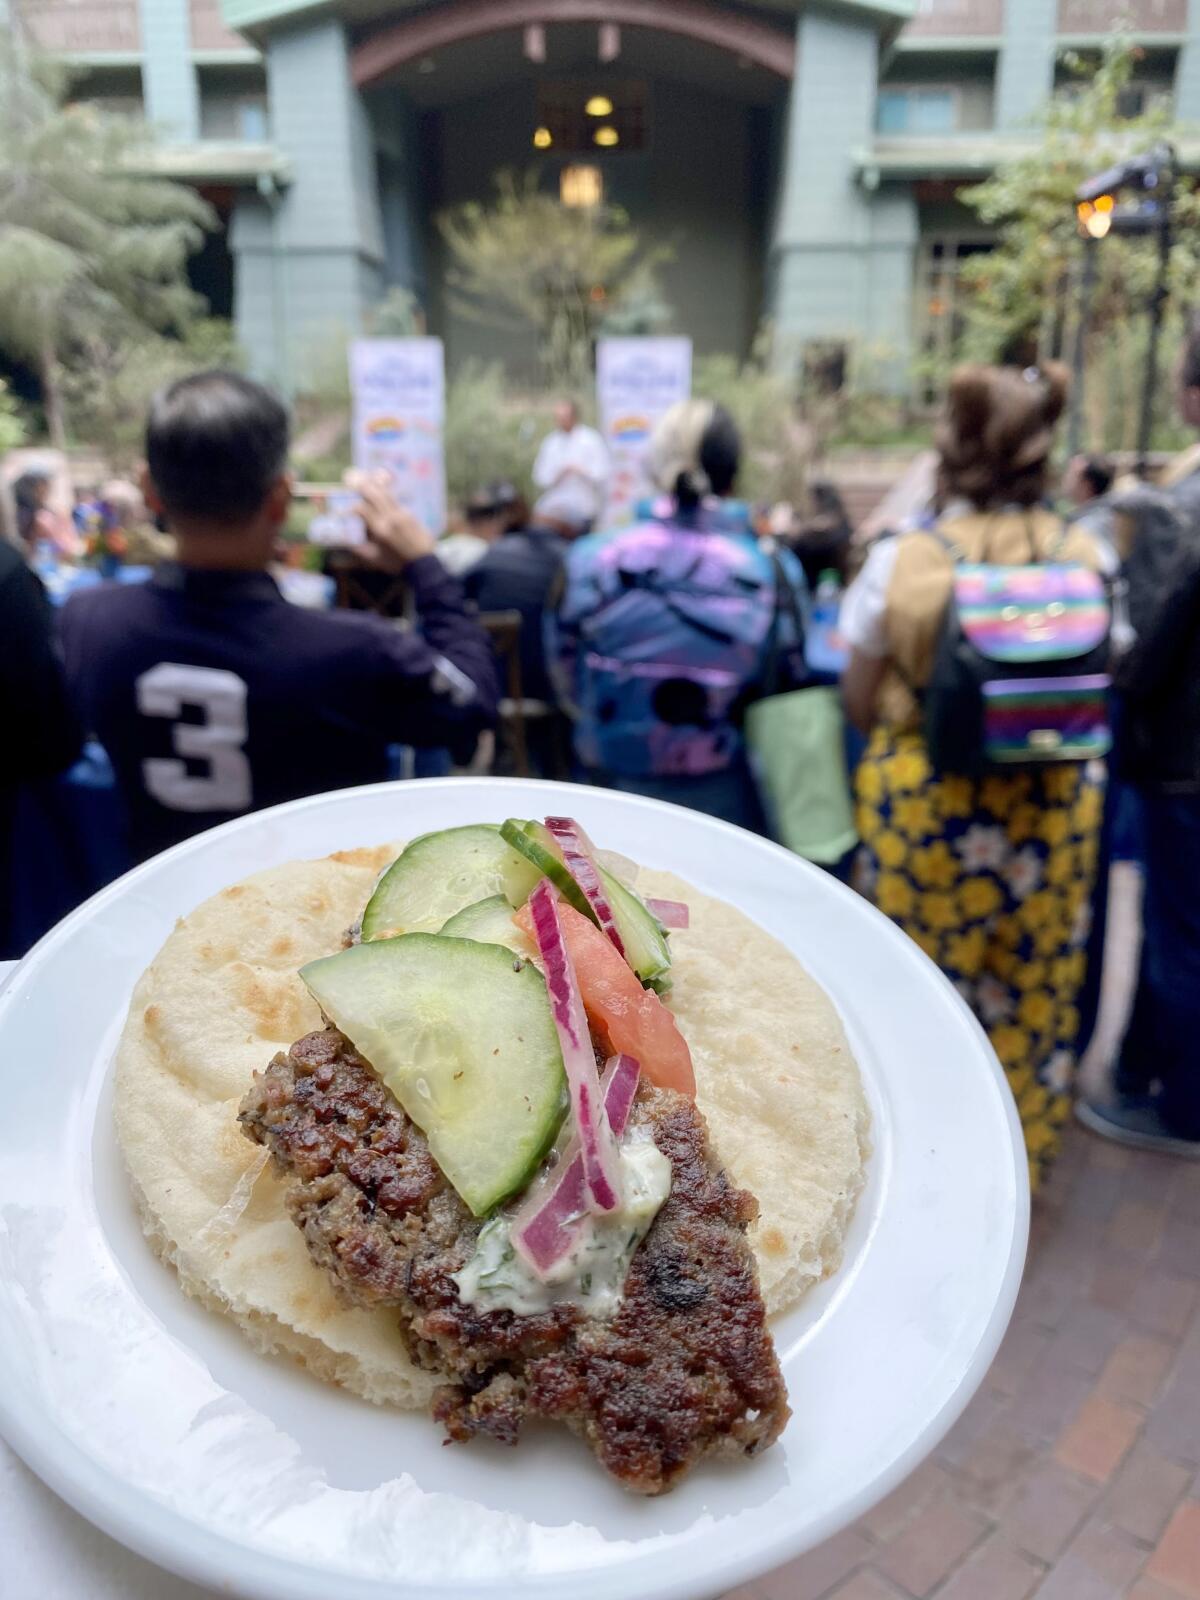 An Impossible gyro at Disney California Adventure Food & Wine Festival.